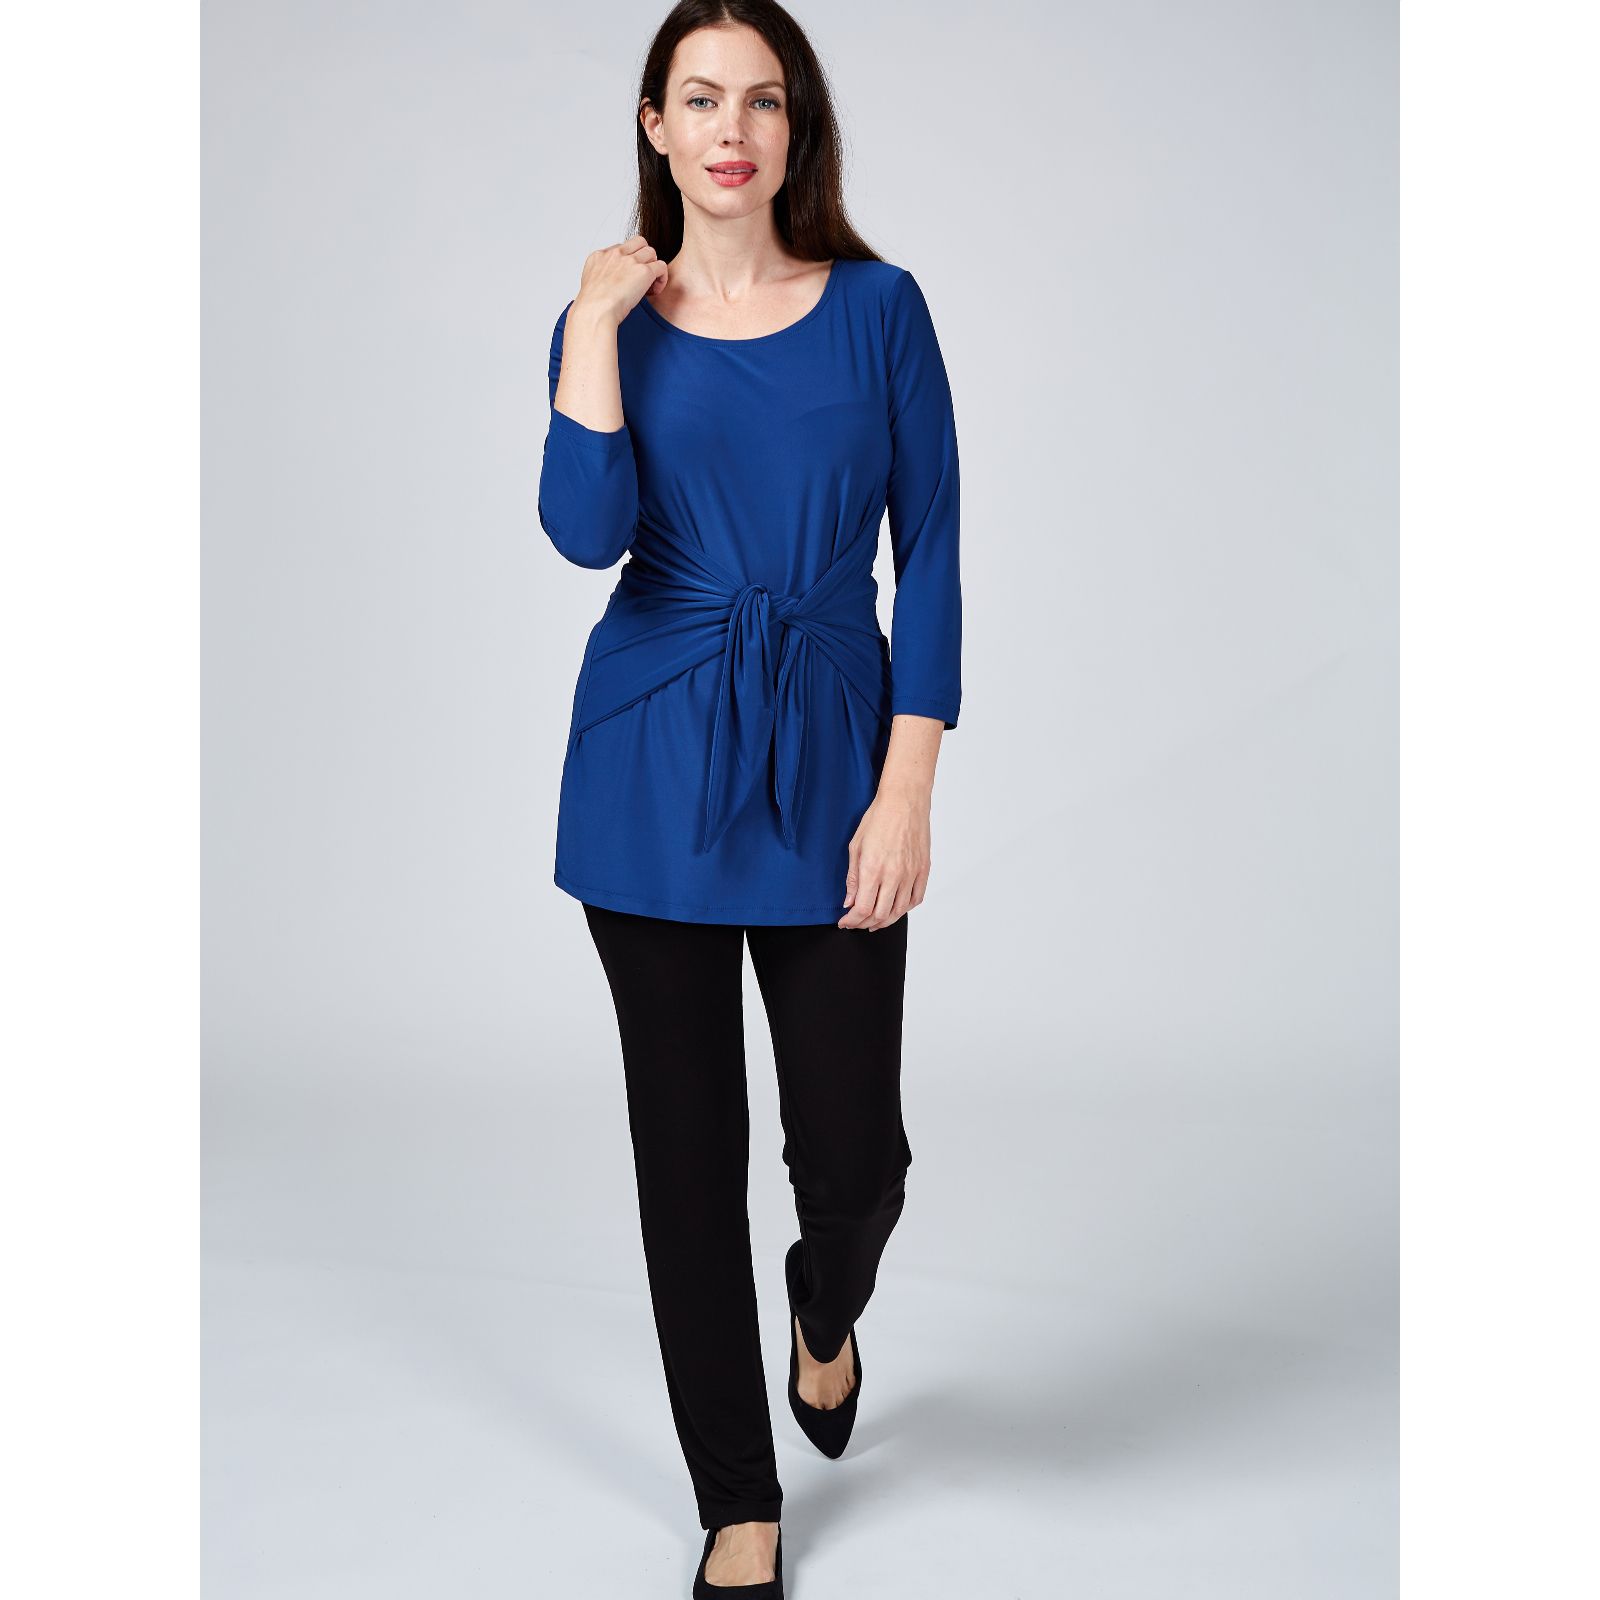 Attitudes by Renee Jersey 3/4 Sleeve Tie Front Top - QVC UK